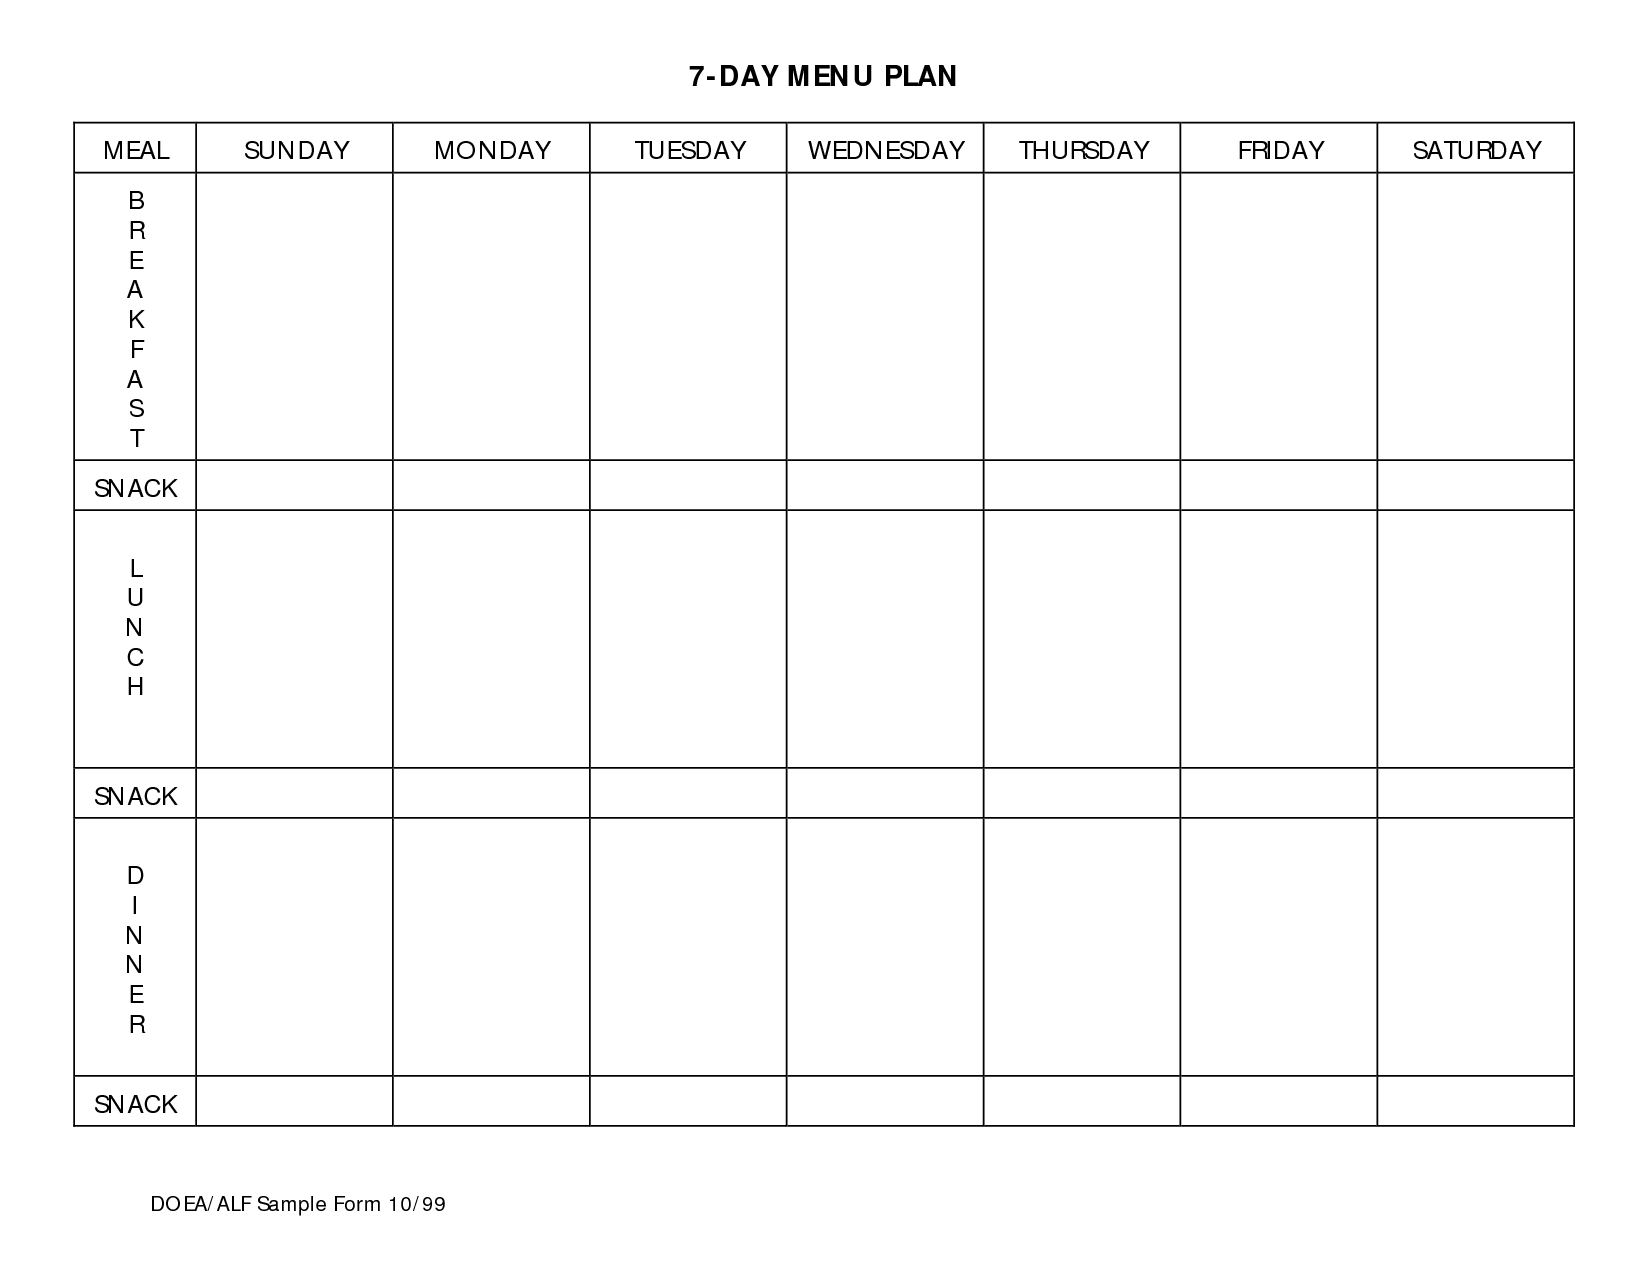 Day Meal Planner Template  Beachbody  Meal Planner Template throughout 7 Day Menu Planner Template